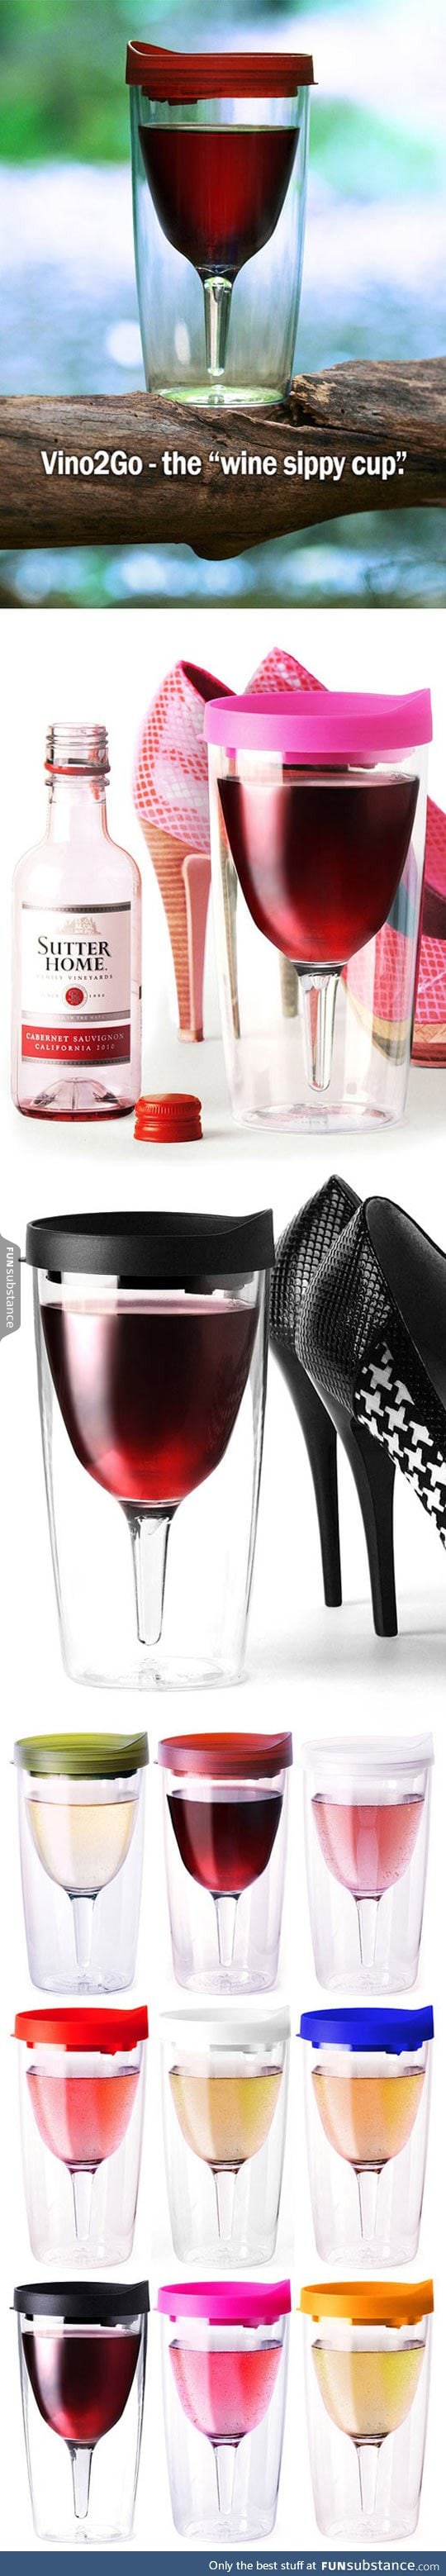 Clever wine sippy cup